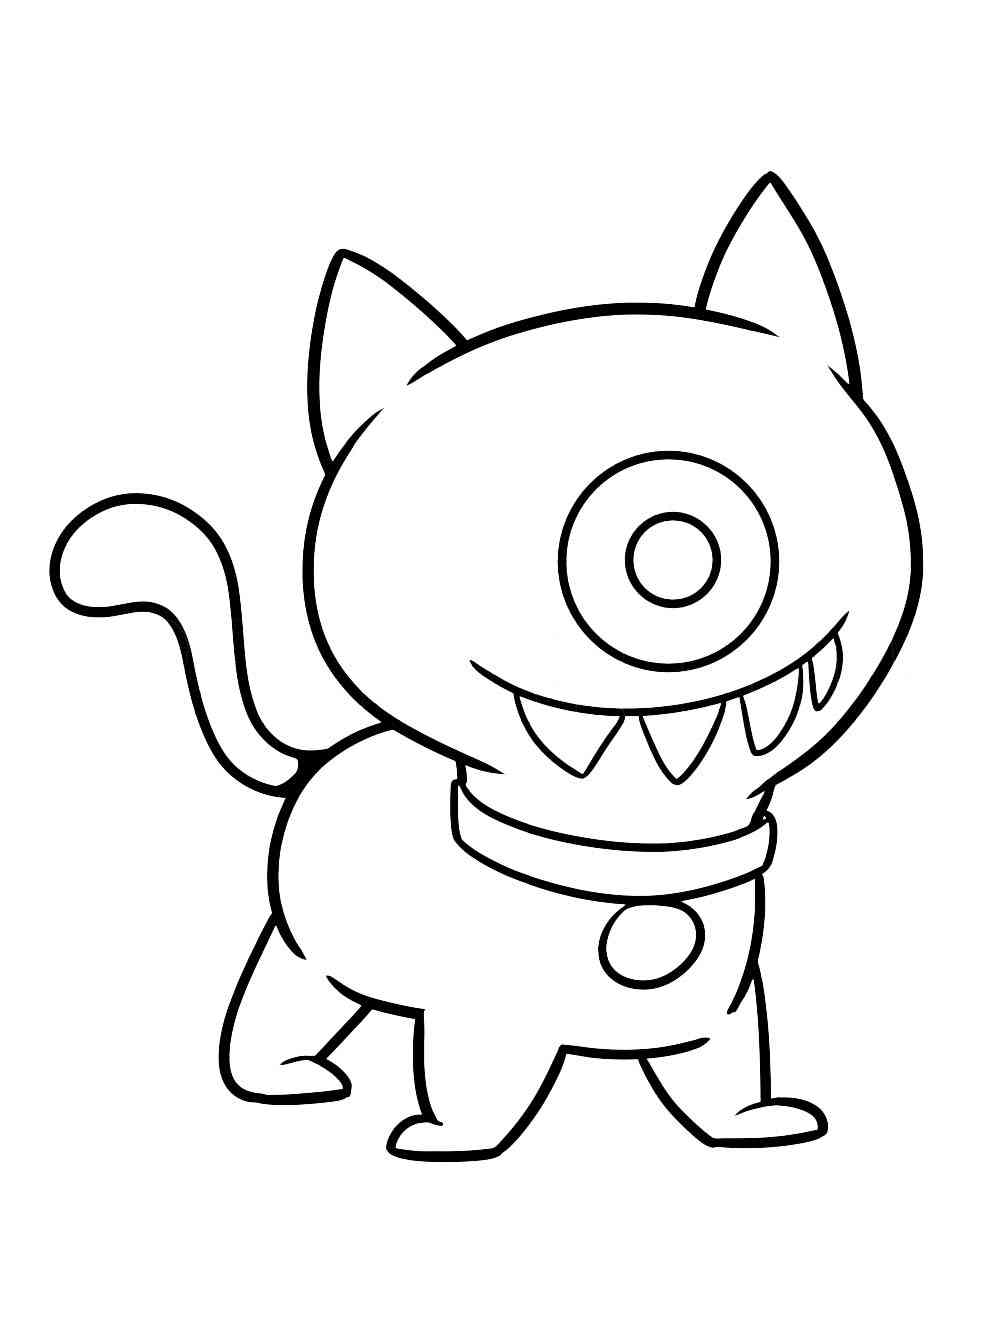 UglyDolls coloring pages